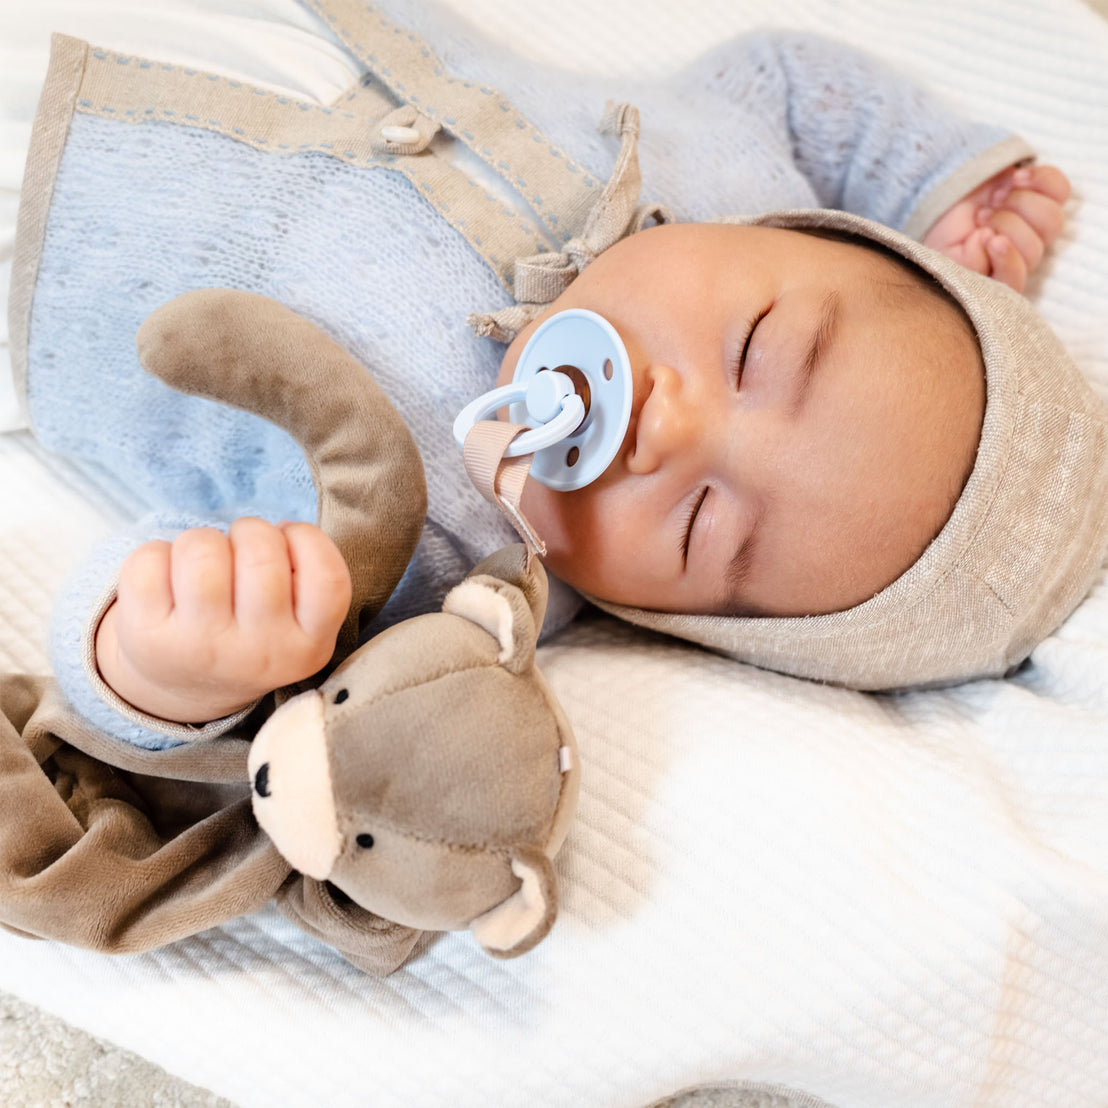 A peaceful baby with an Austin Bear Buddy Pacifier Holder sleeps soundly while snuggling.